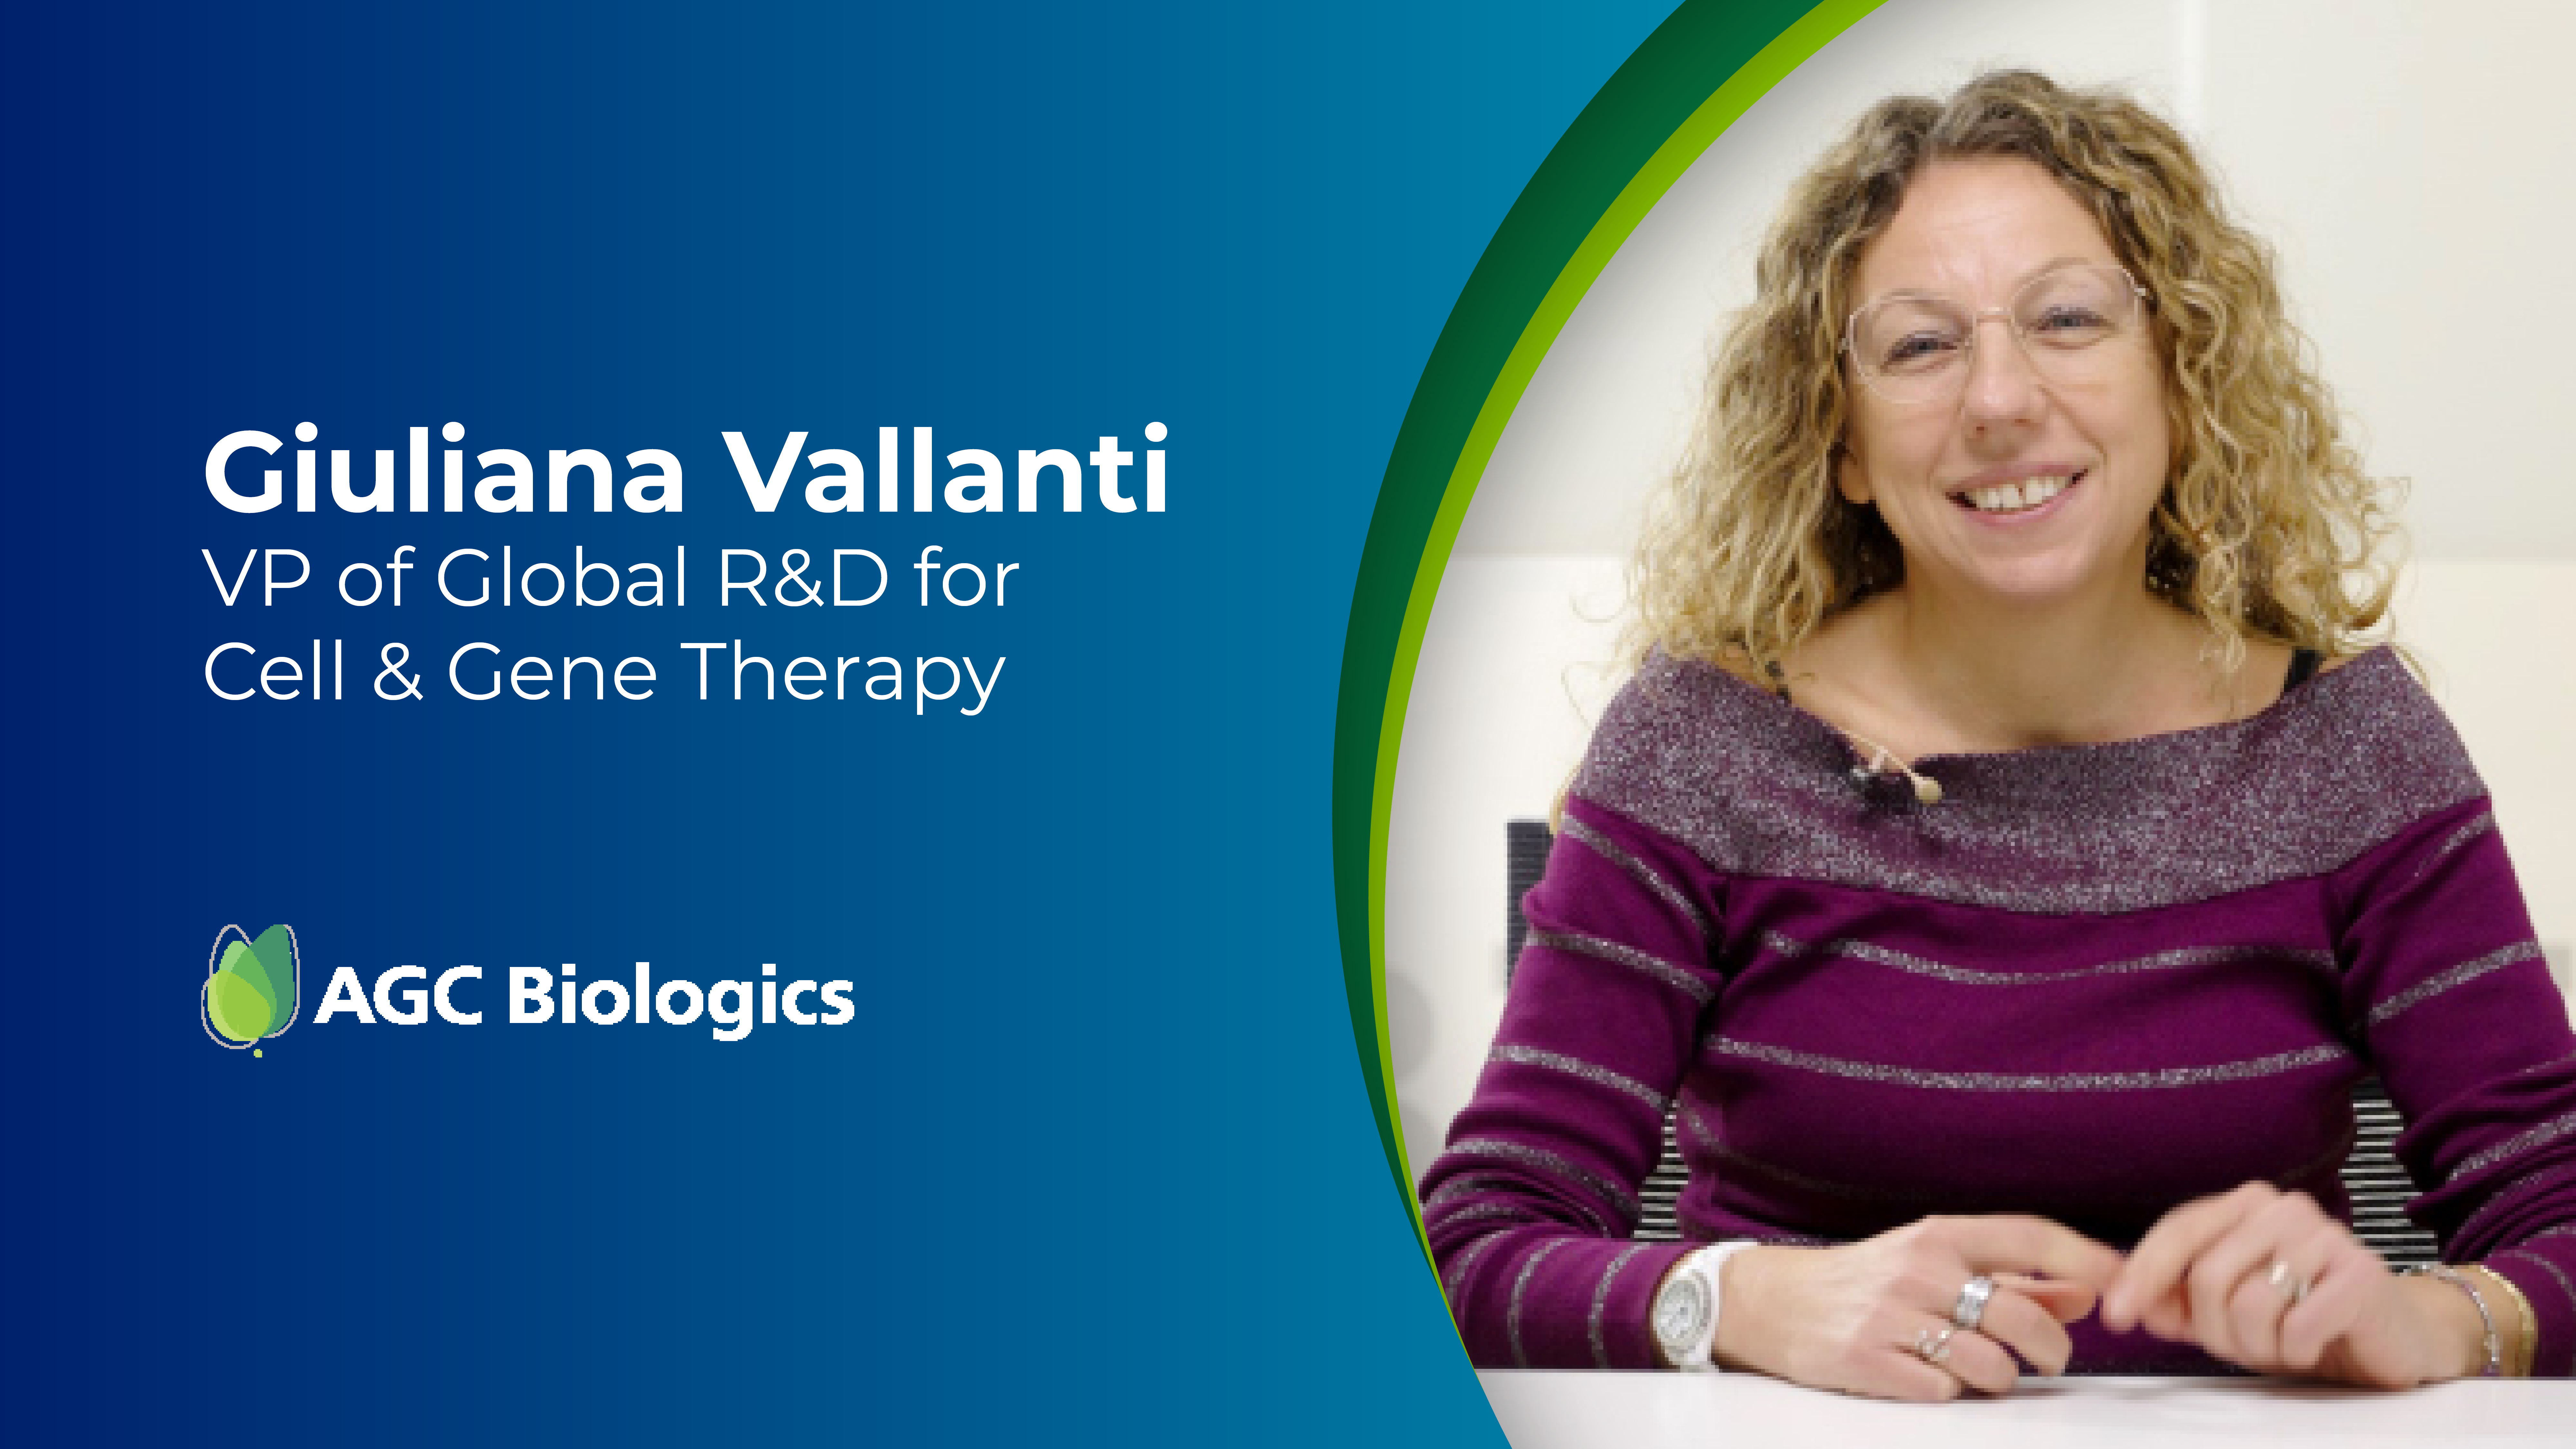 Giuliana Vallanti, VP of Global R&D for Cell & Gene Therapy, describes the incredible strides made in CGT